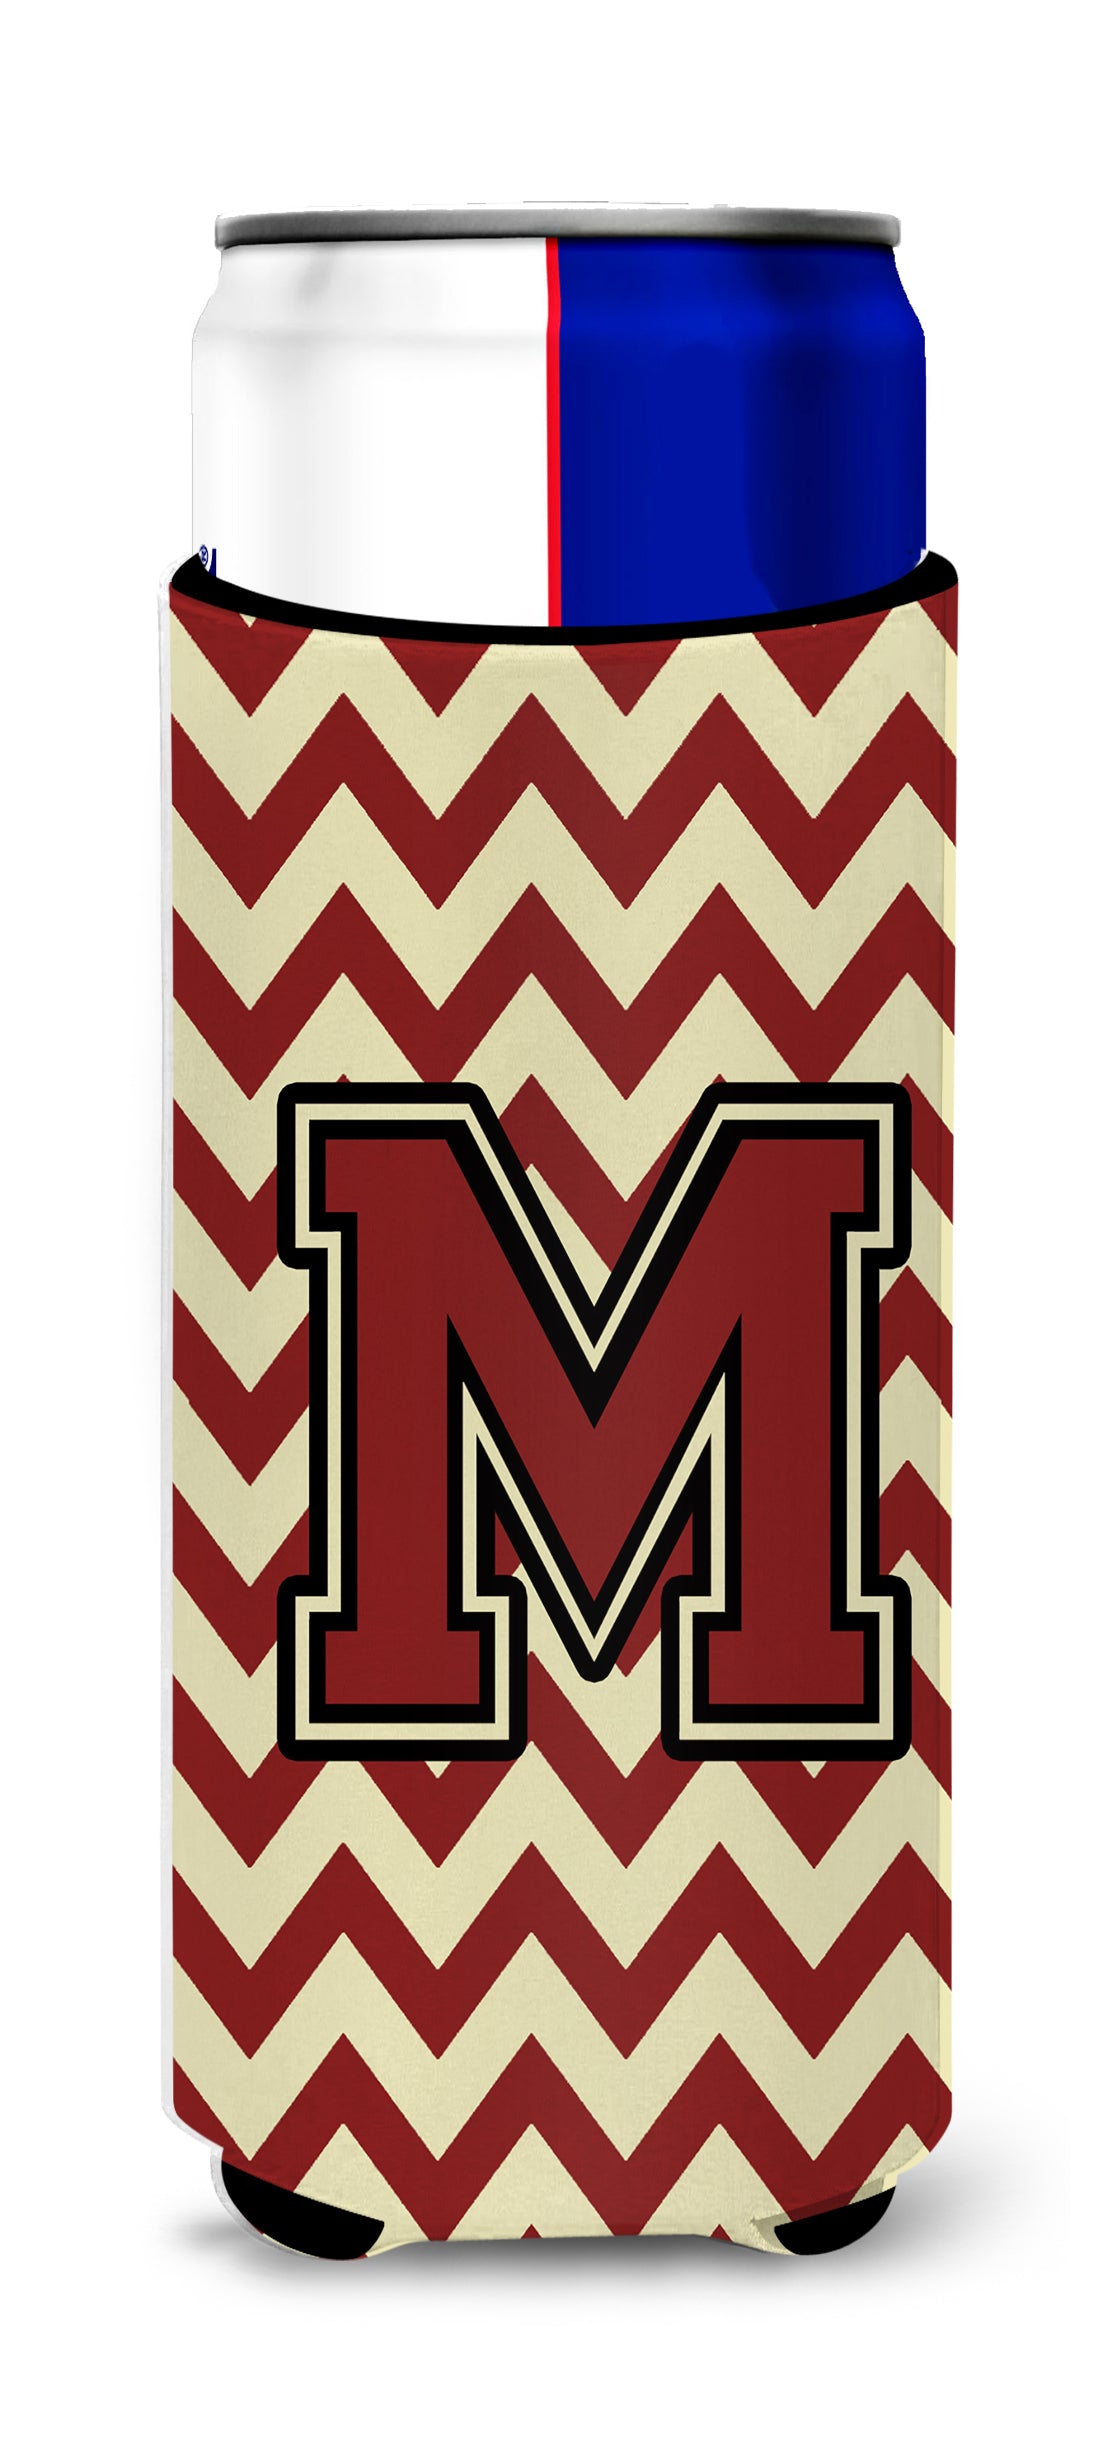 Letter M Chevron Maroon and Gold Ultra Beverage Insulators for slim cans CJ1061-MMUK.